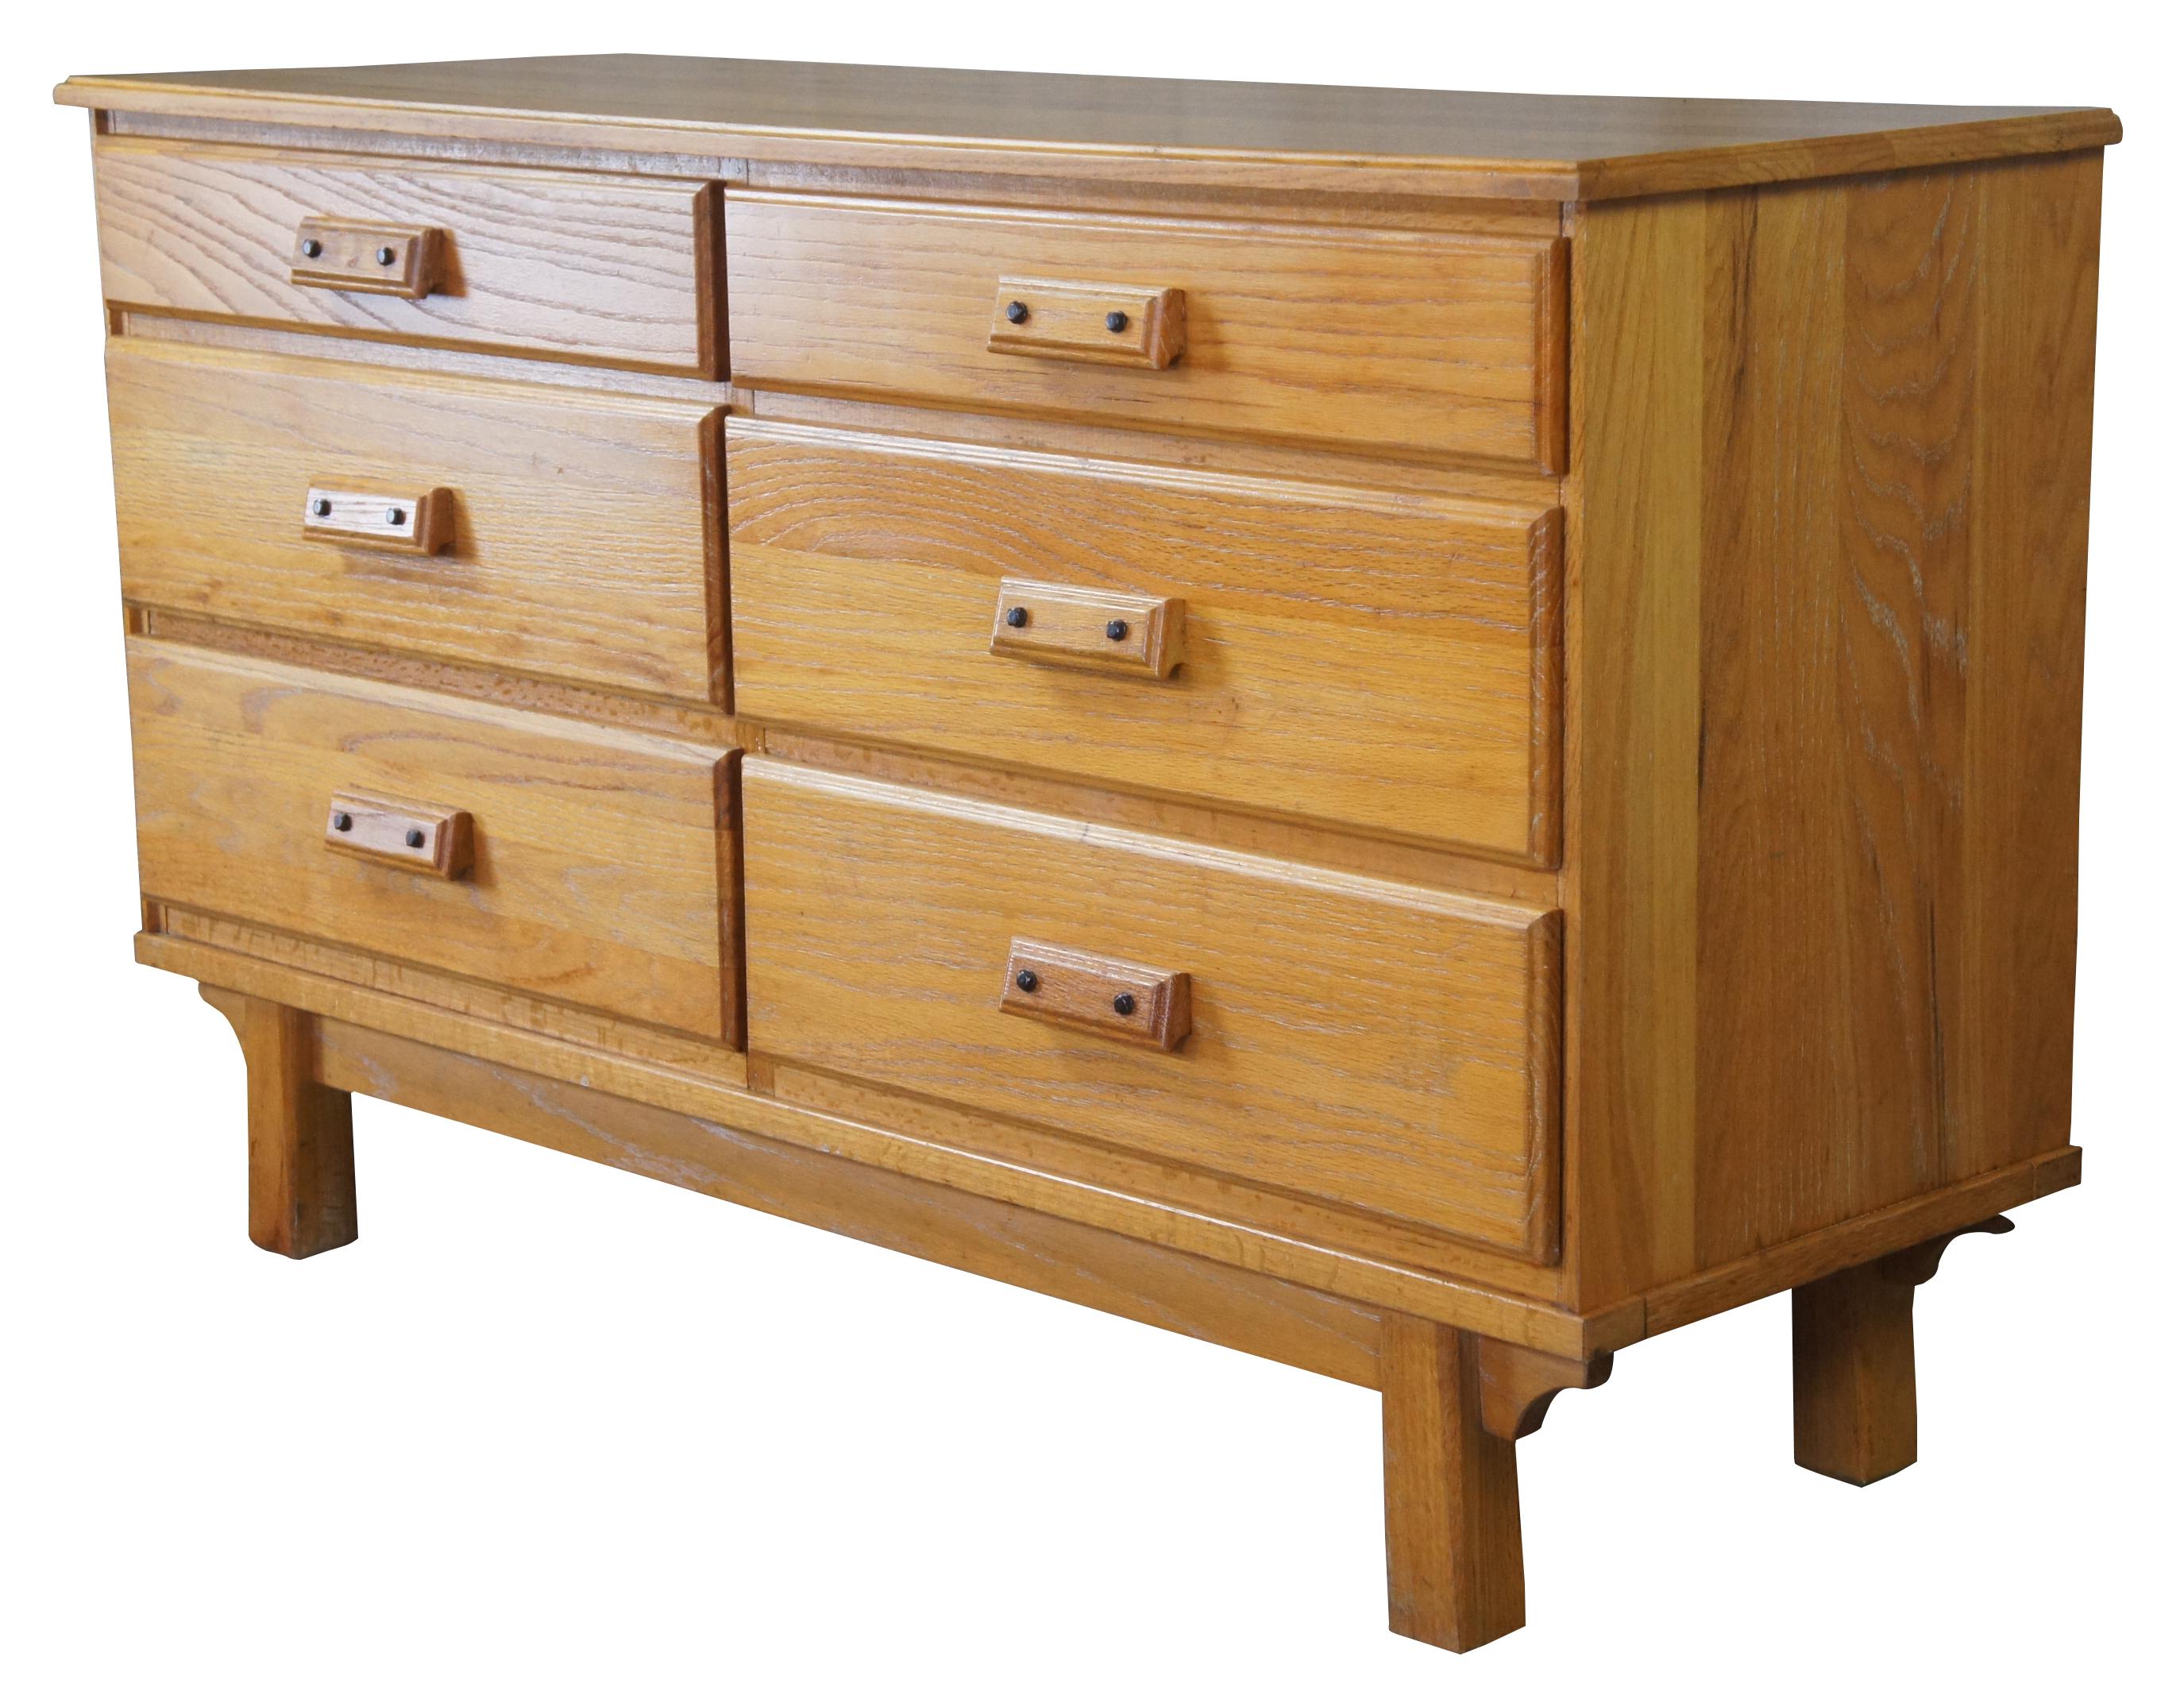 Desert oak double dresser by Westwood of Texas. Features a classic ranch style rectangular form with six drawers over a footed base. Measure: 52